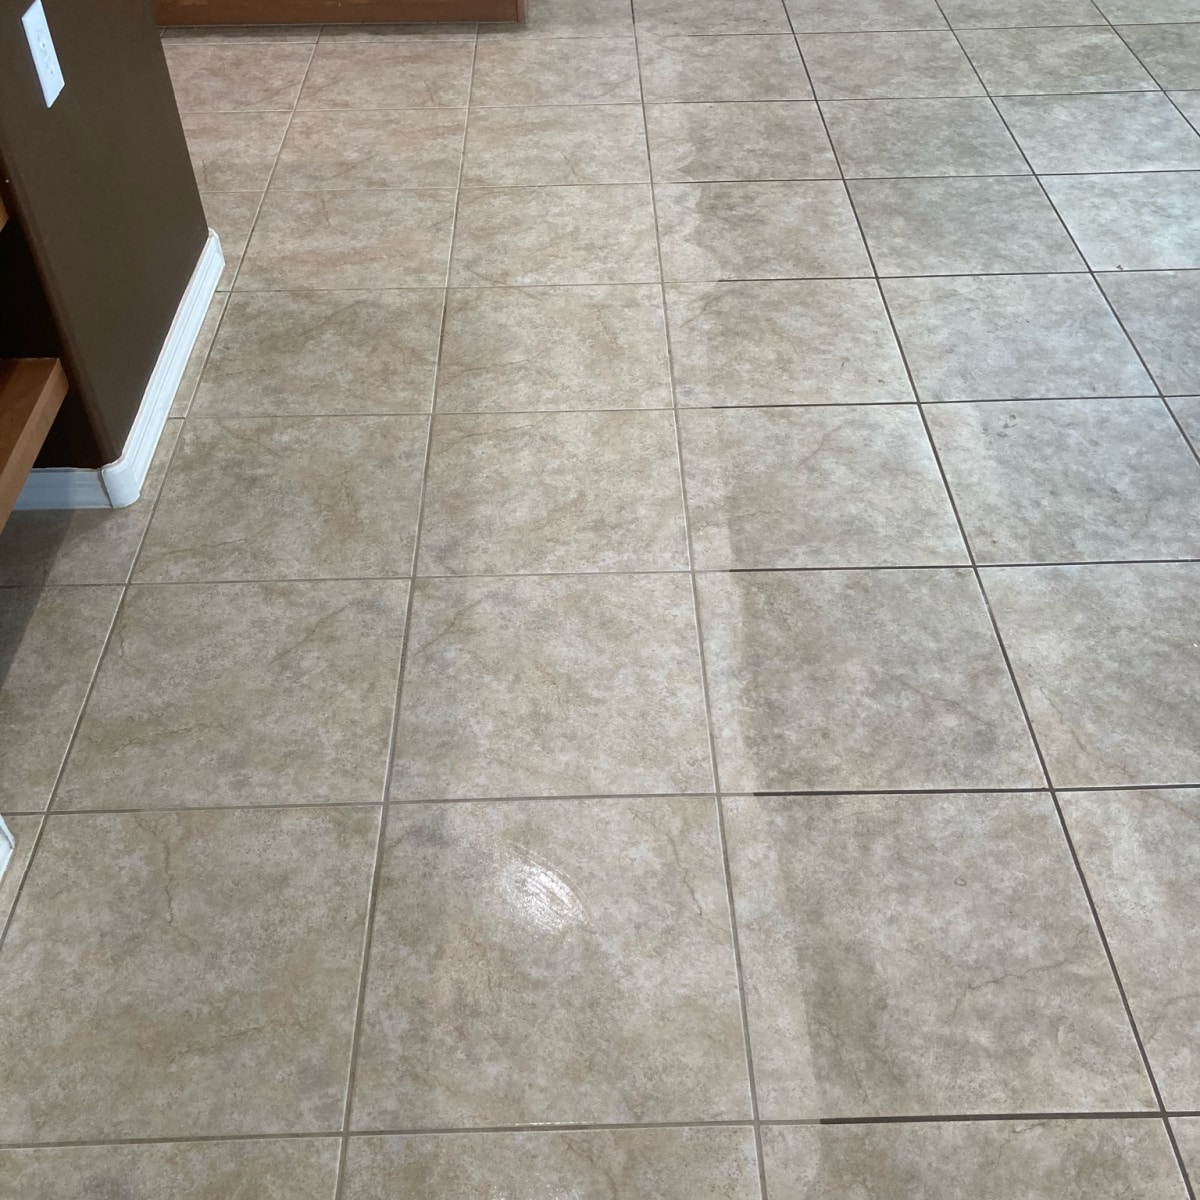 Tile and Grout Cleaning in Scottsdale, Arizona